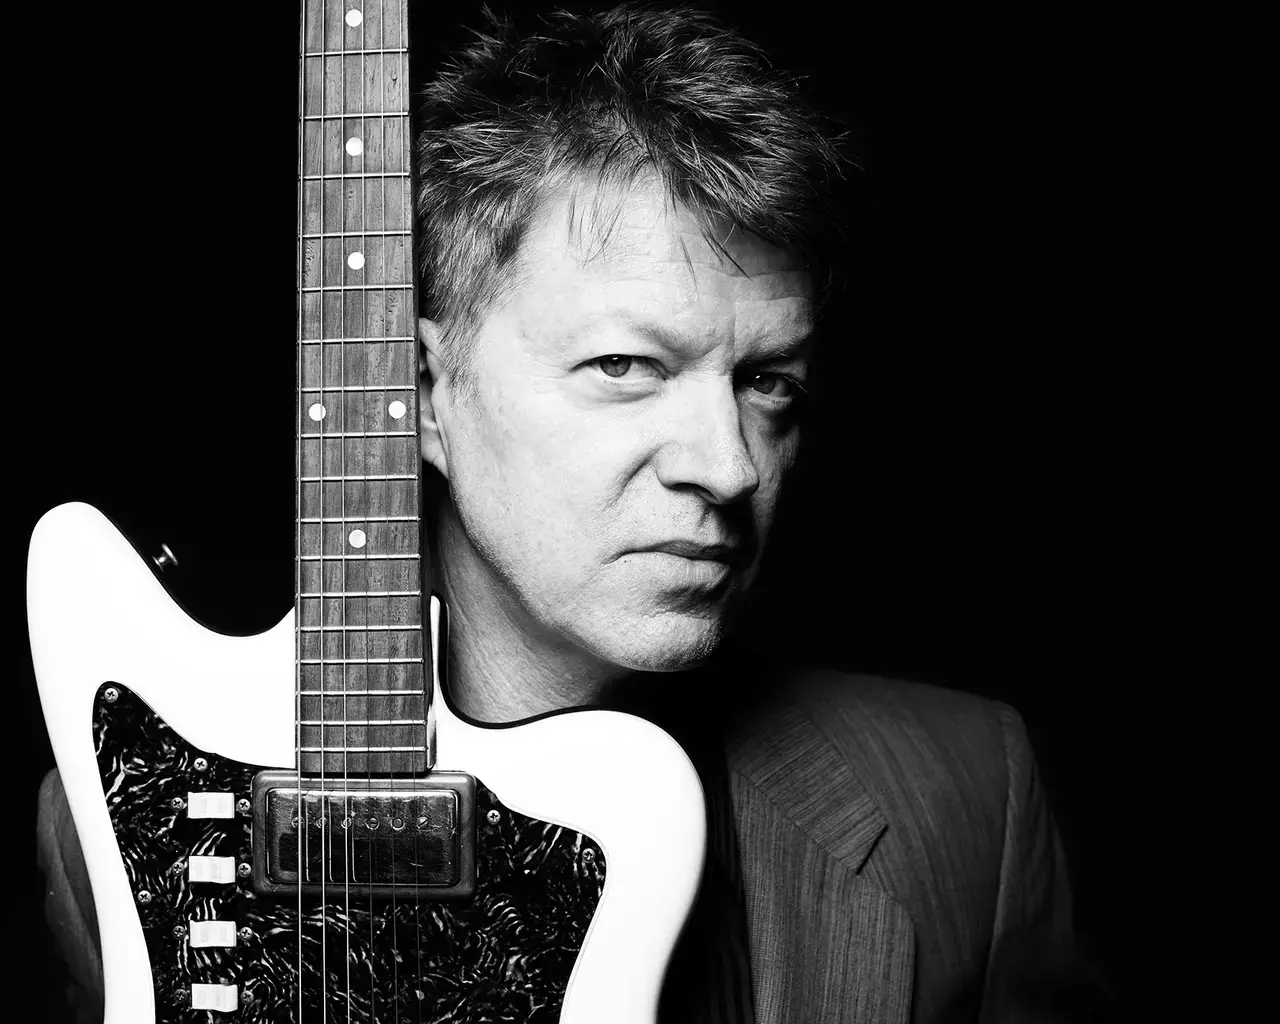 Nels Cline. Photo by Nathan West.